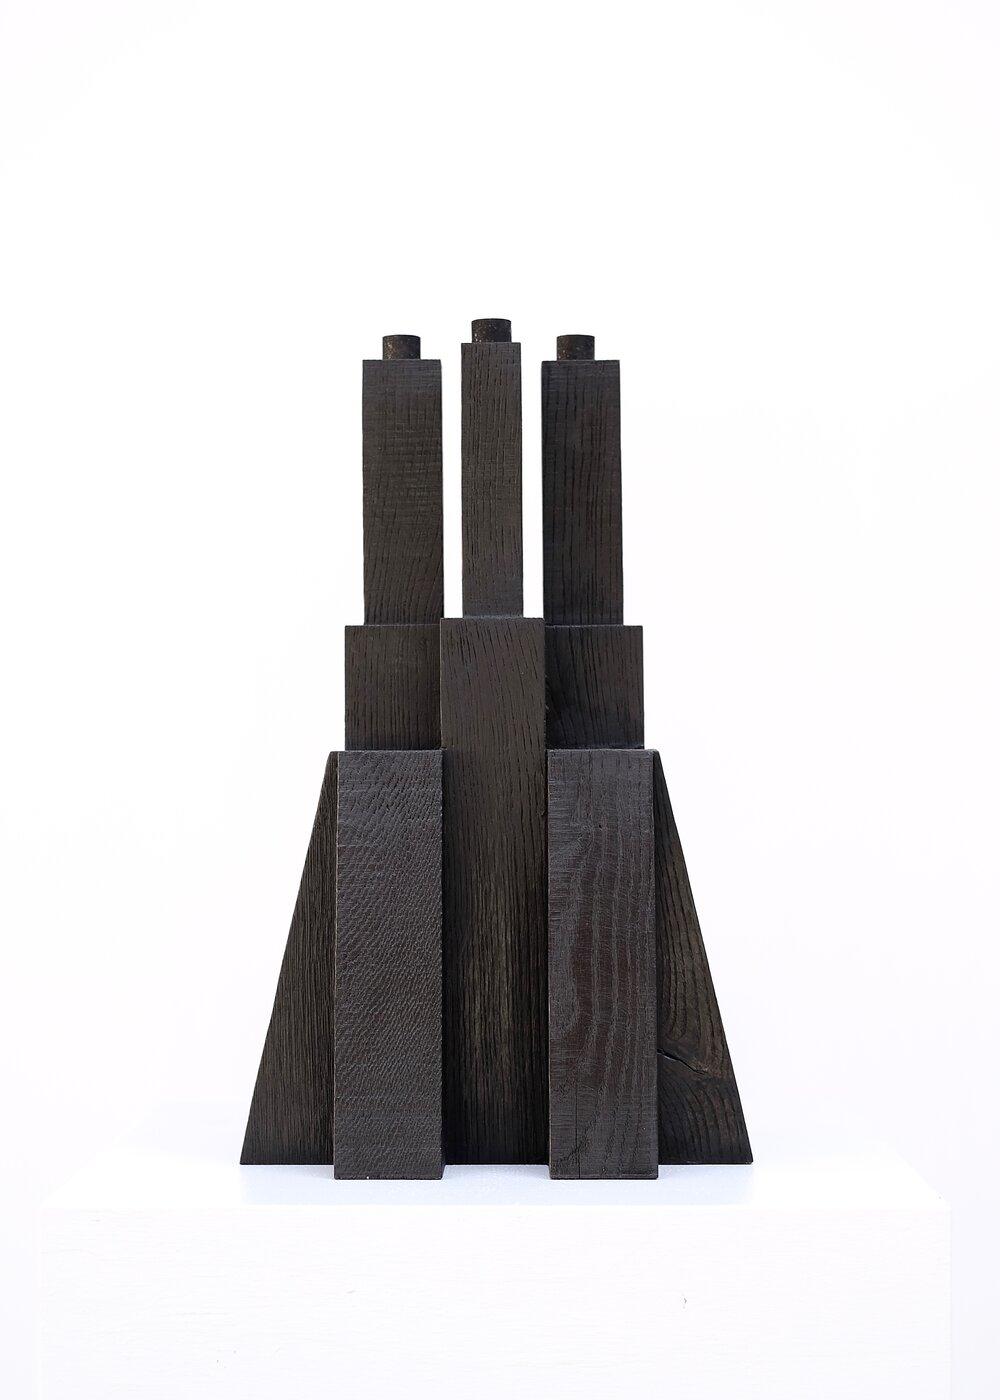 Contemporary black candle holder in oak, Bunker 2.0 by Arno Declercq

Dimensions: W 32 x L 32 x H 50 cm
Materials: Burned and waxed oak

Made by hand, in Belgium.

Arno Declercq
Belgian designer and art dealer who makes bespoke objects with